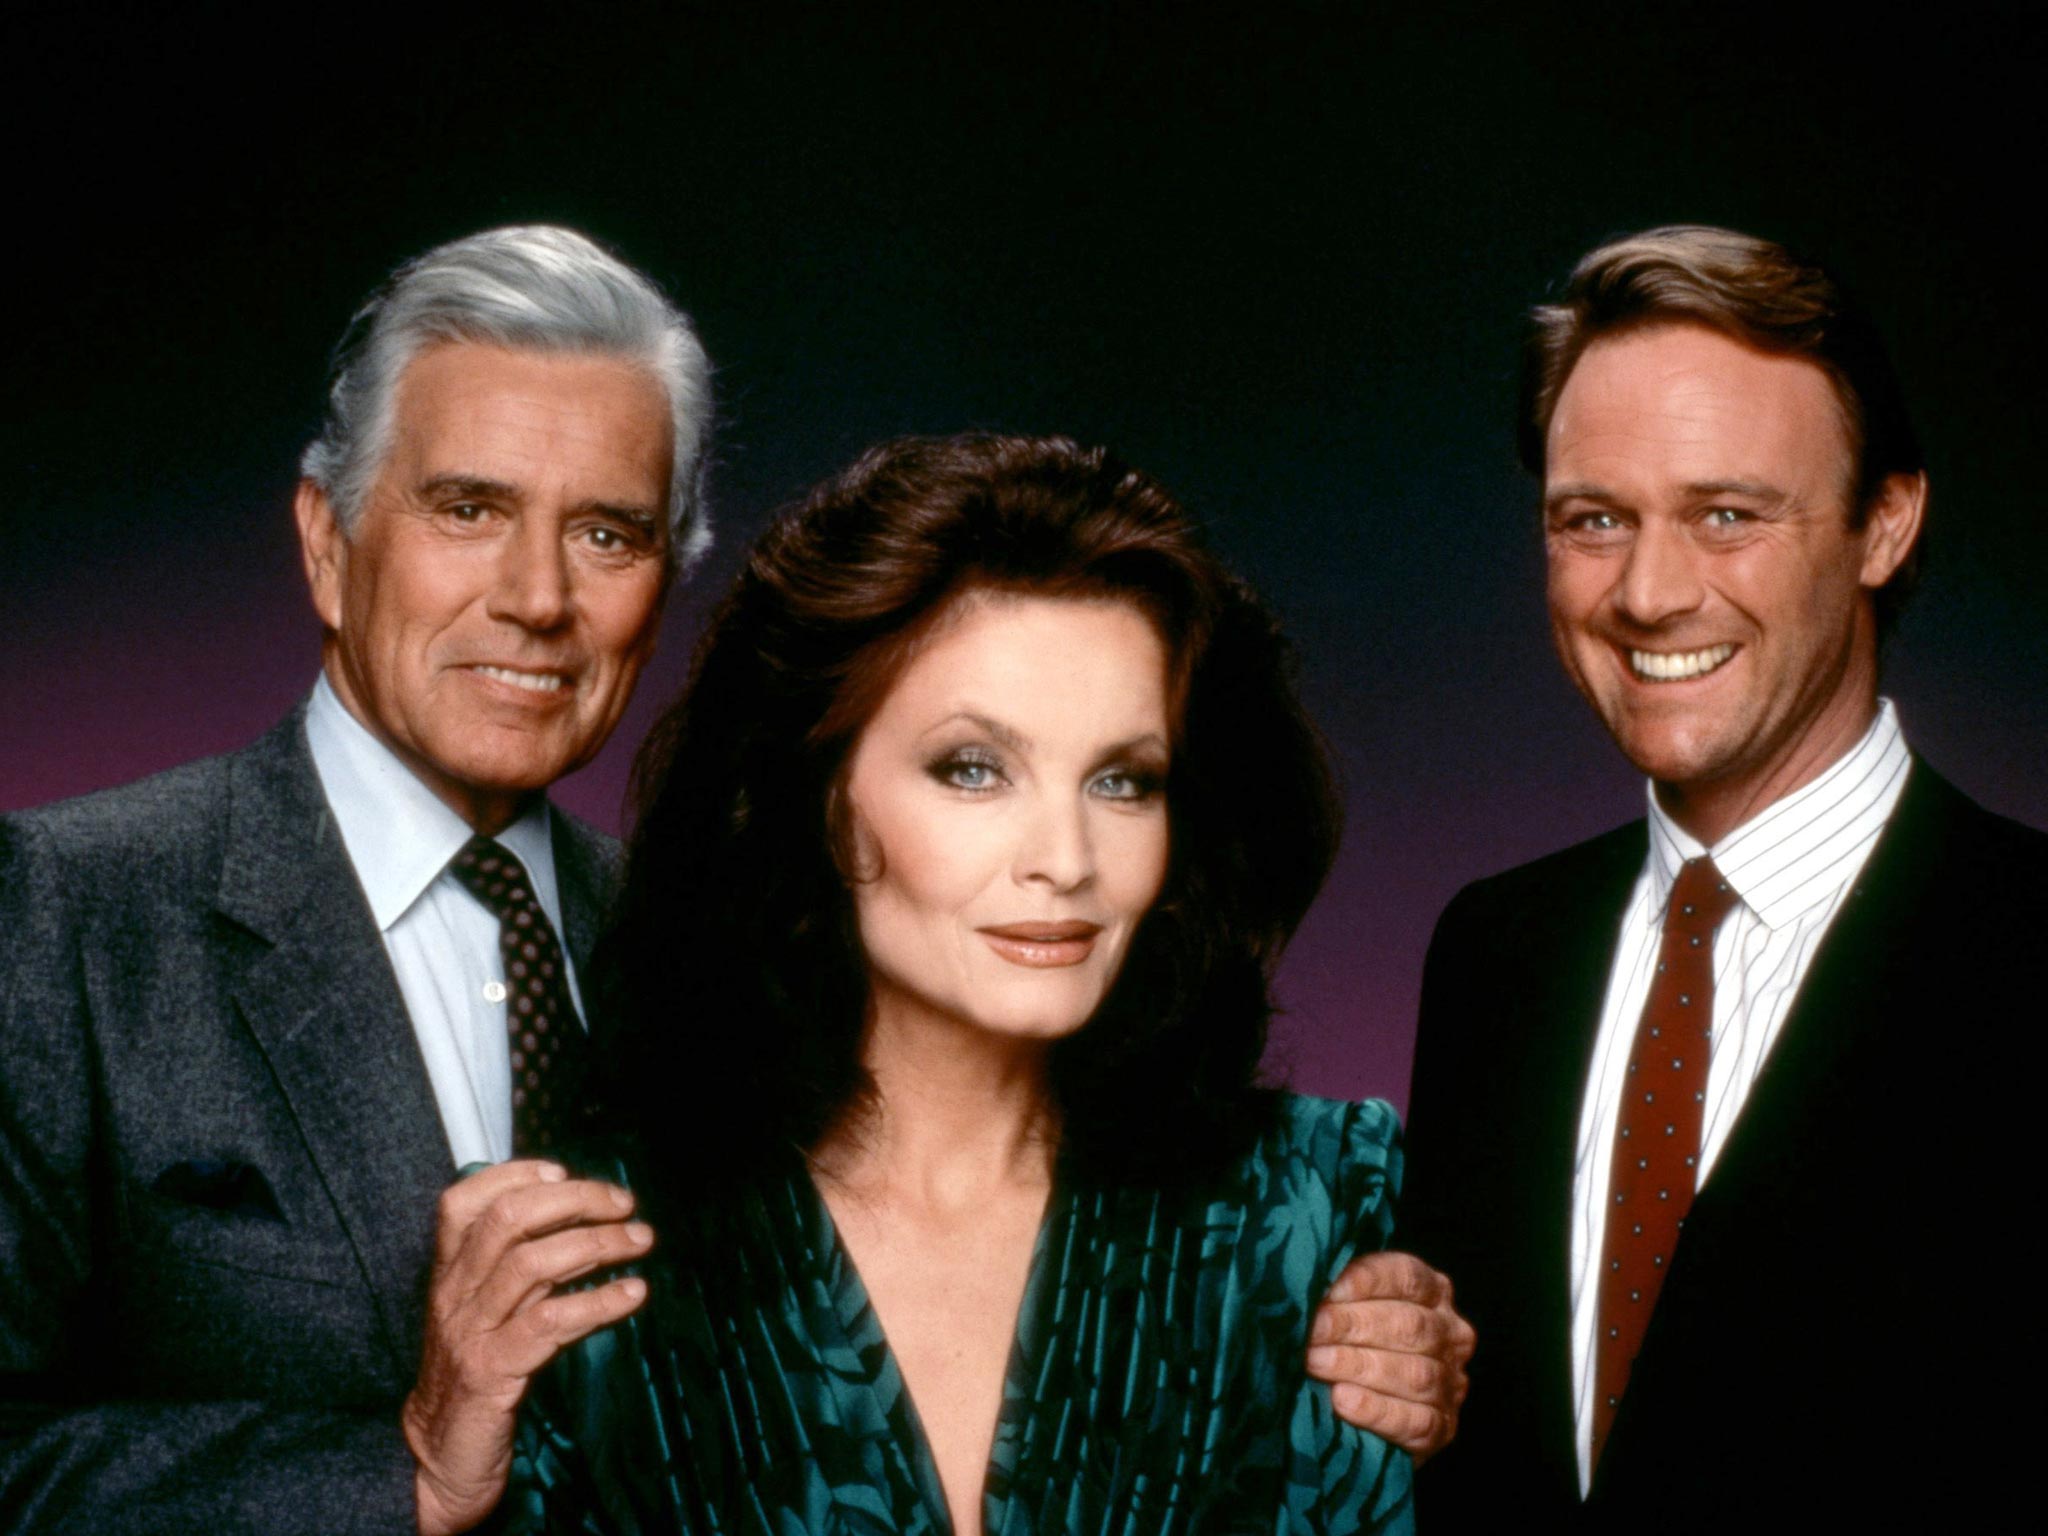 Kate O'Mara with her Dynasty co-stars John Forsythe and Christopher Cazenove in 1989